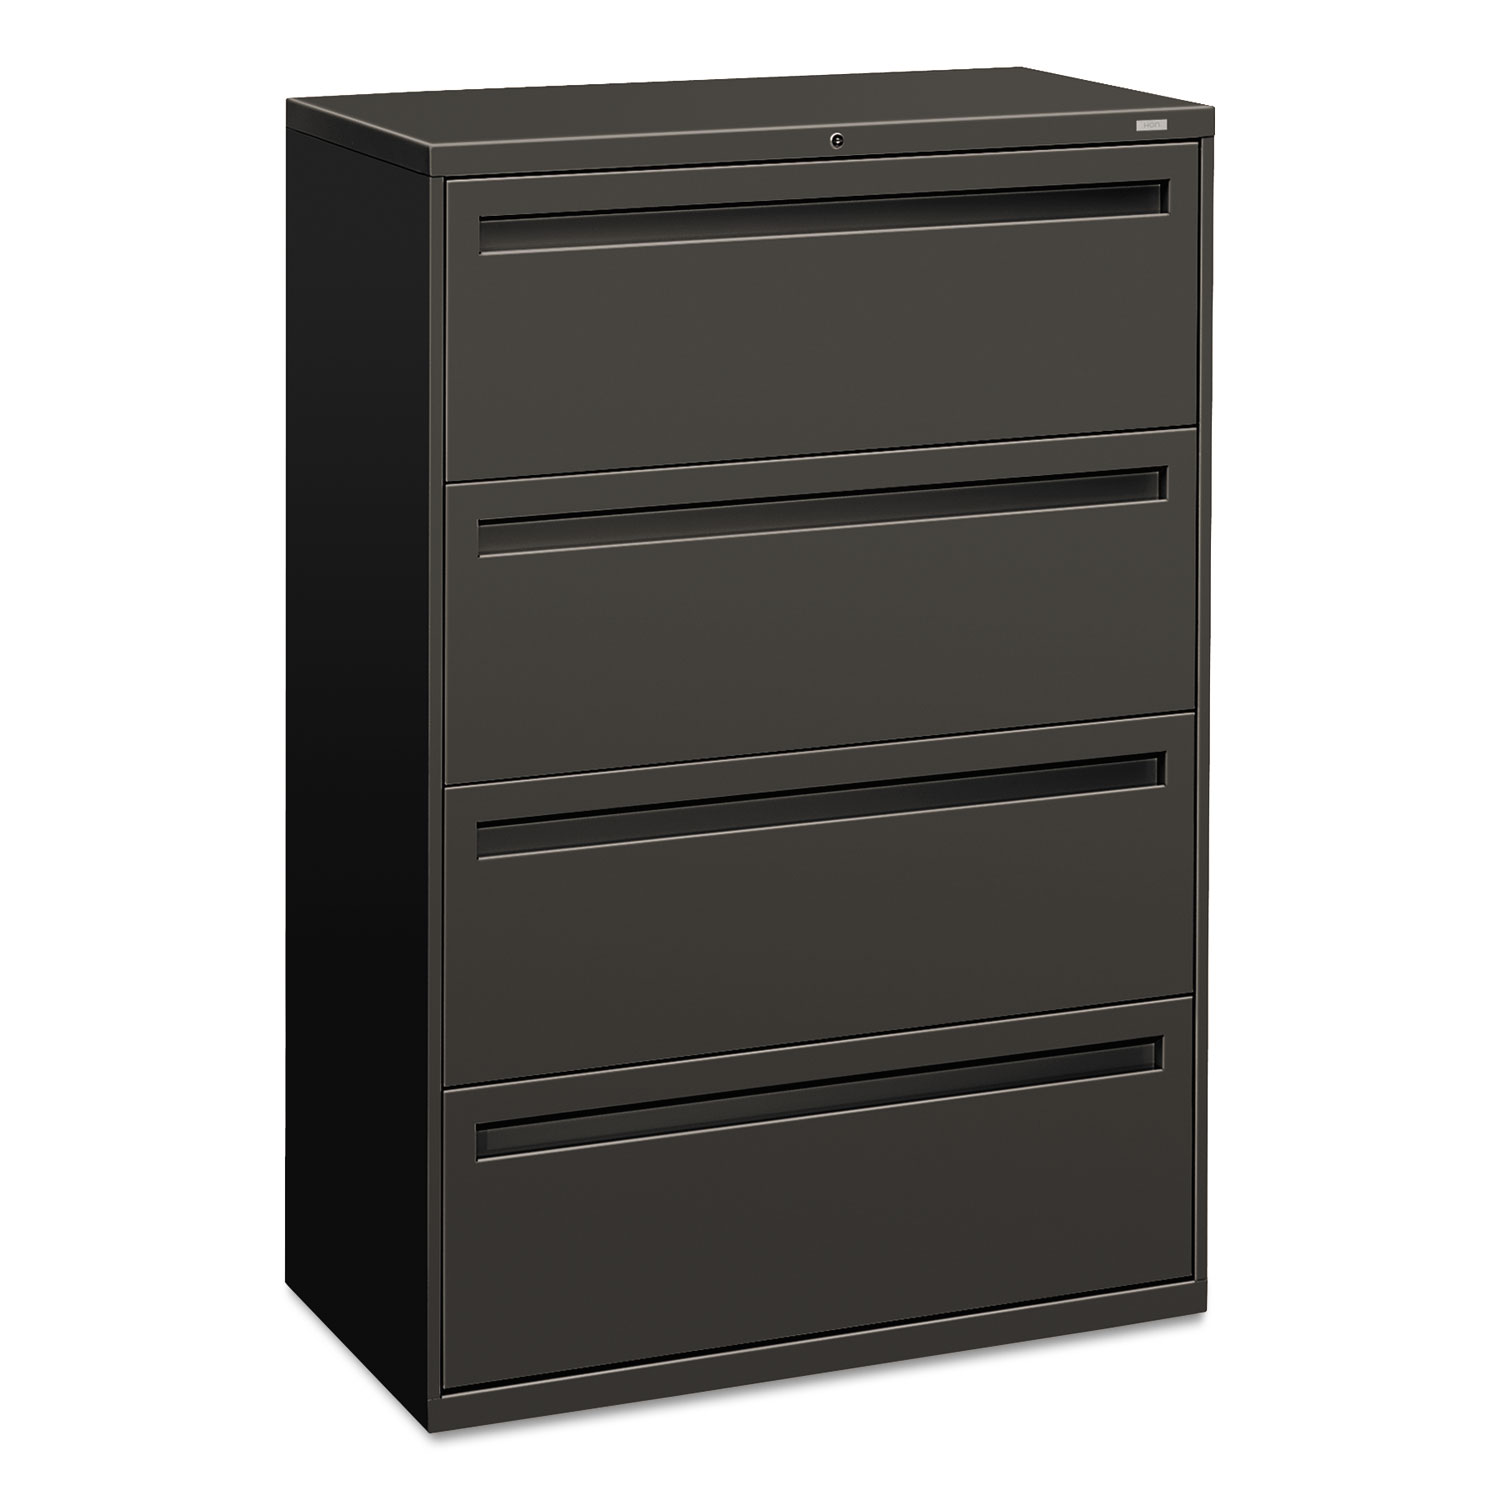 700 Series Four-Drawer Lateral File, 36w x 19-1/4d, Charcoal